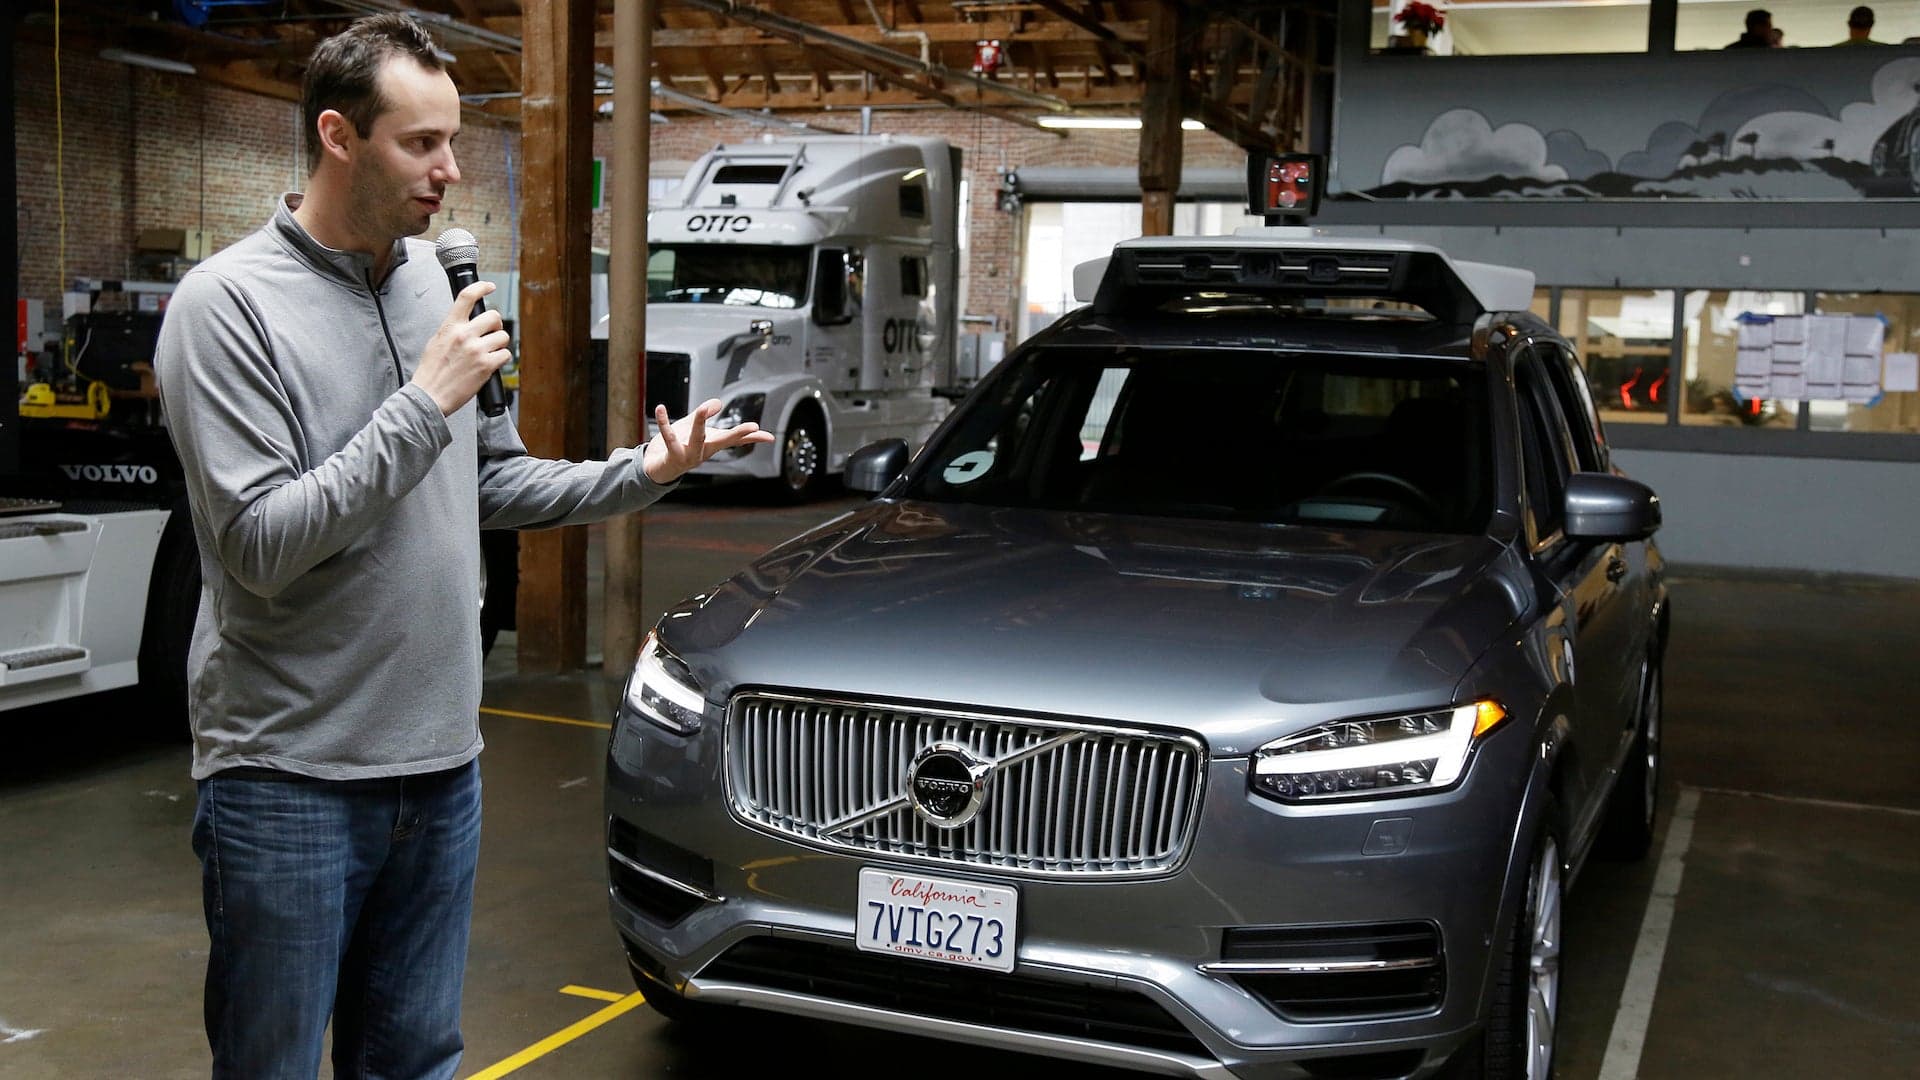 “Safety Third” Was an Ongoing Joke Between Uber Self-Driving Car Engineers